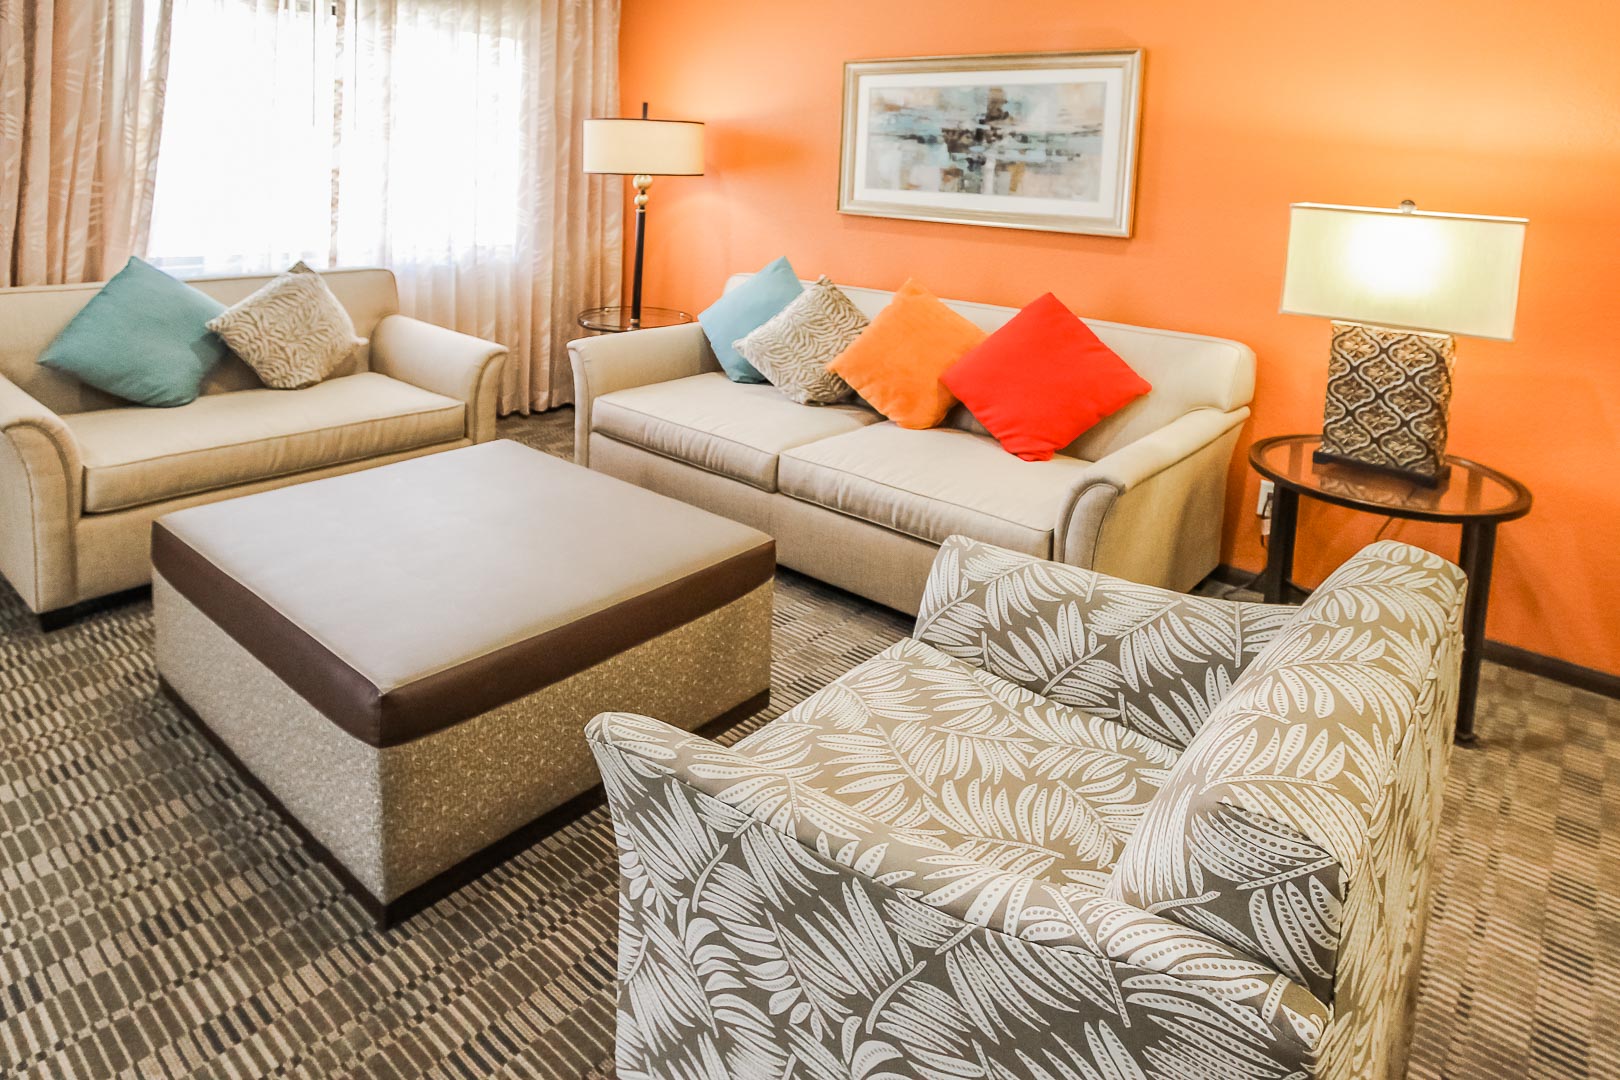 A colorful and modernized living room area at VRI's Desert Isle Resort in California.